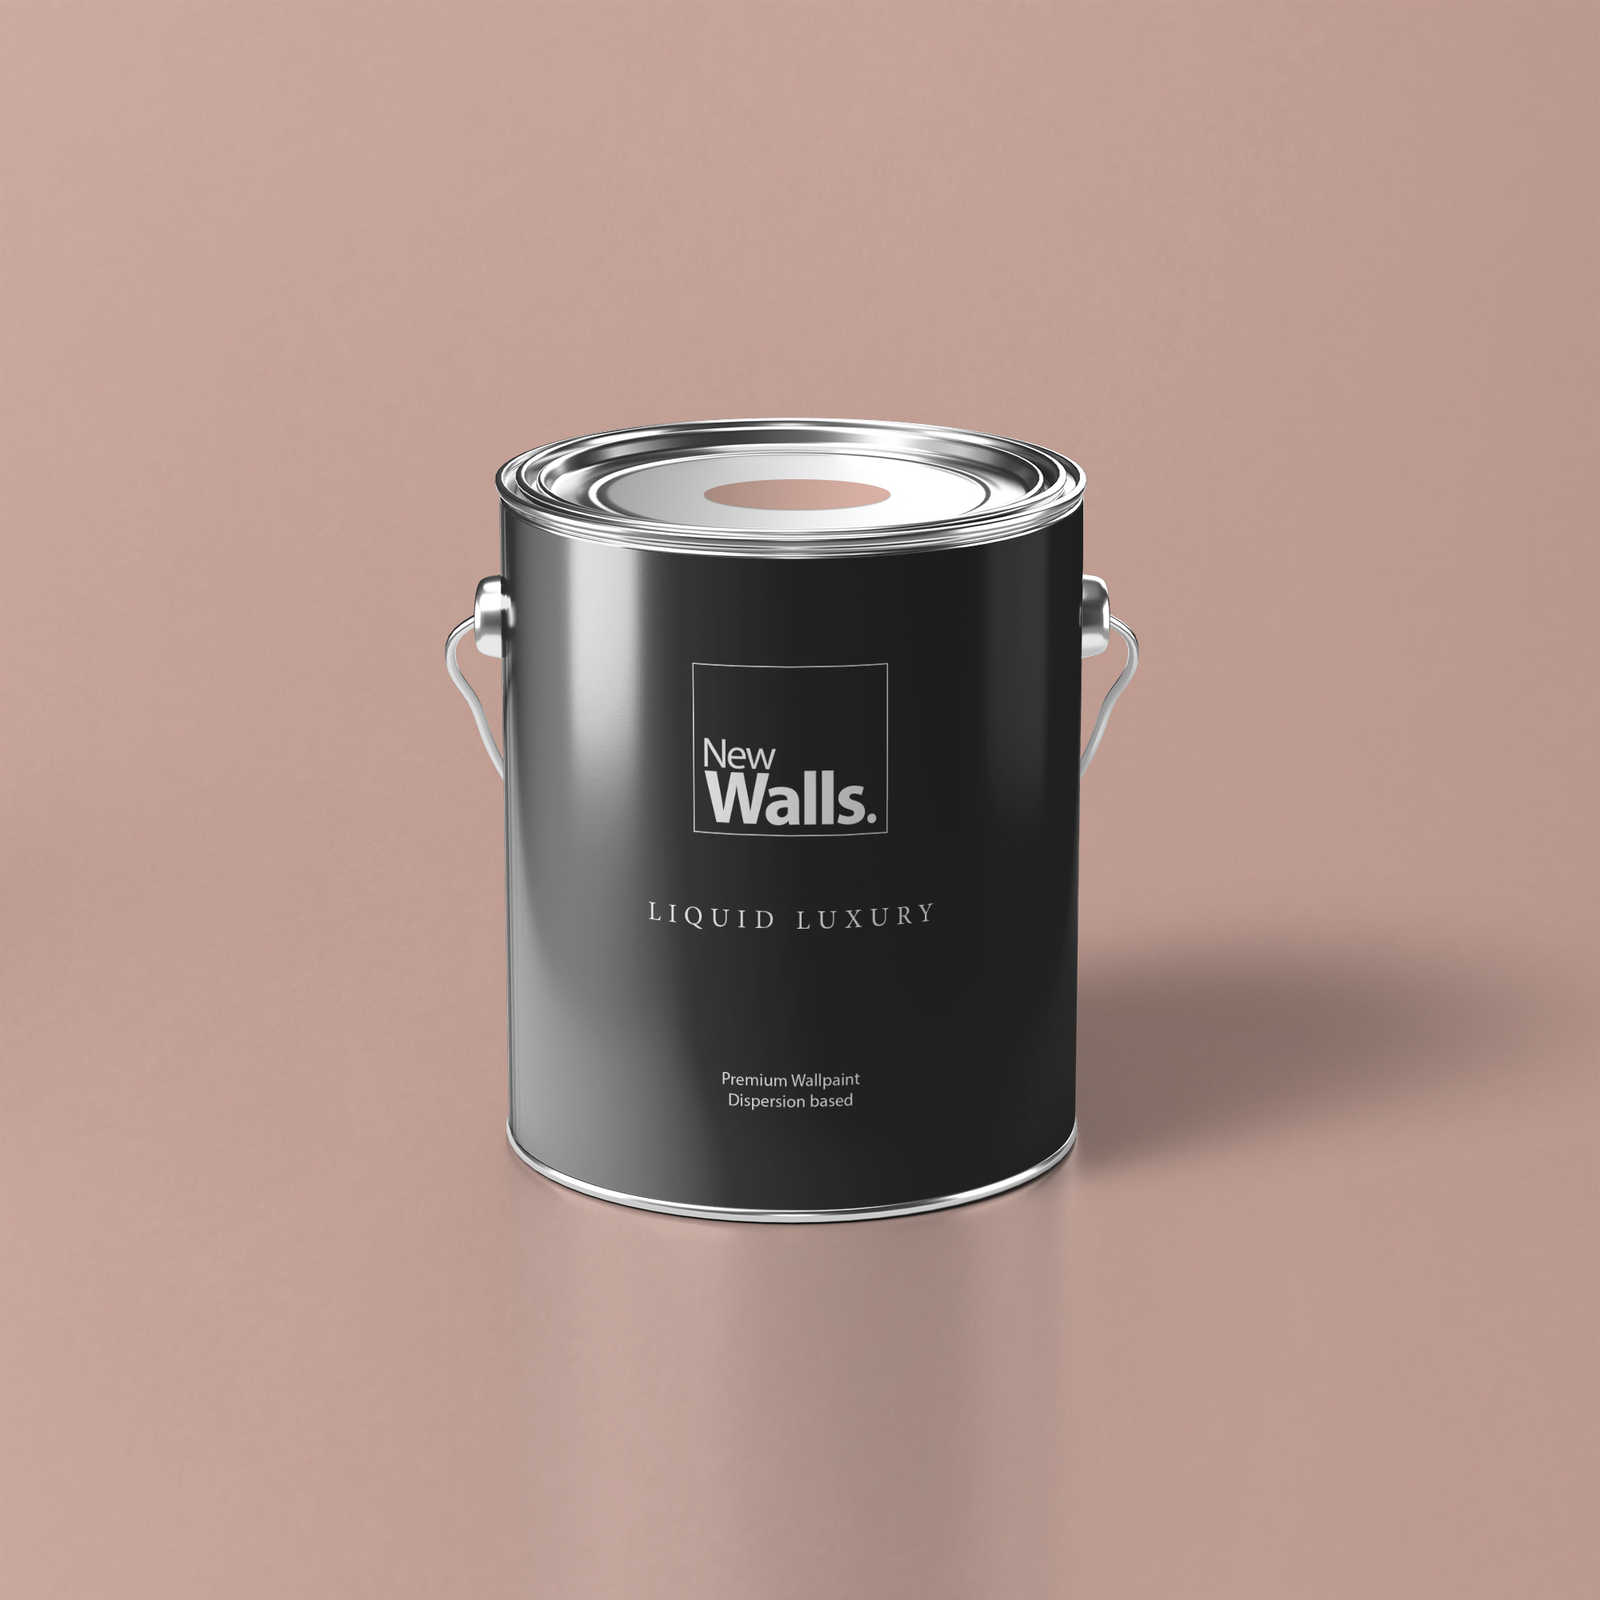 Premium Wall Paint Soft Salmon »Natural Nude« NW1009 – 5 litre
